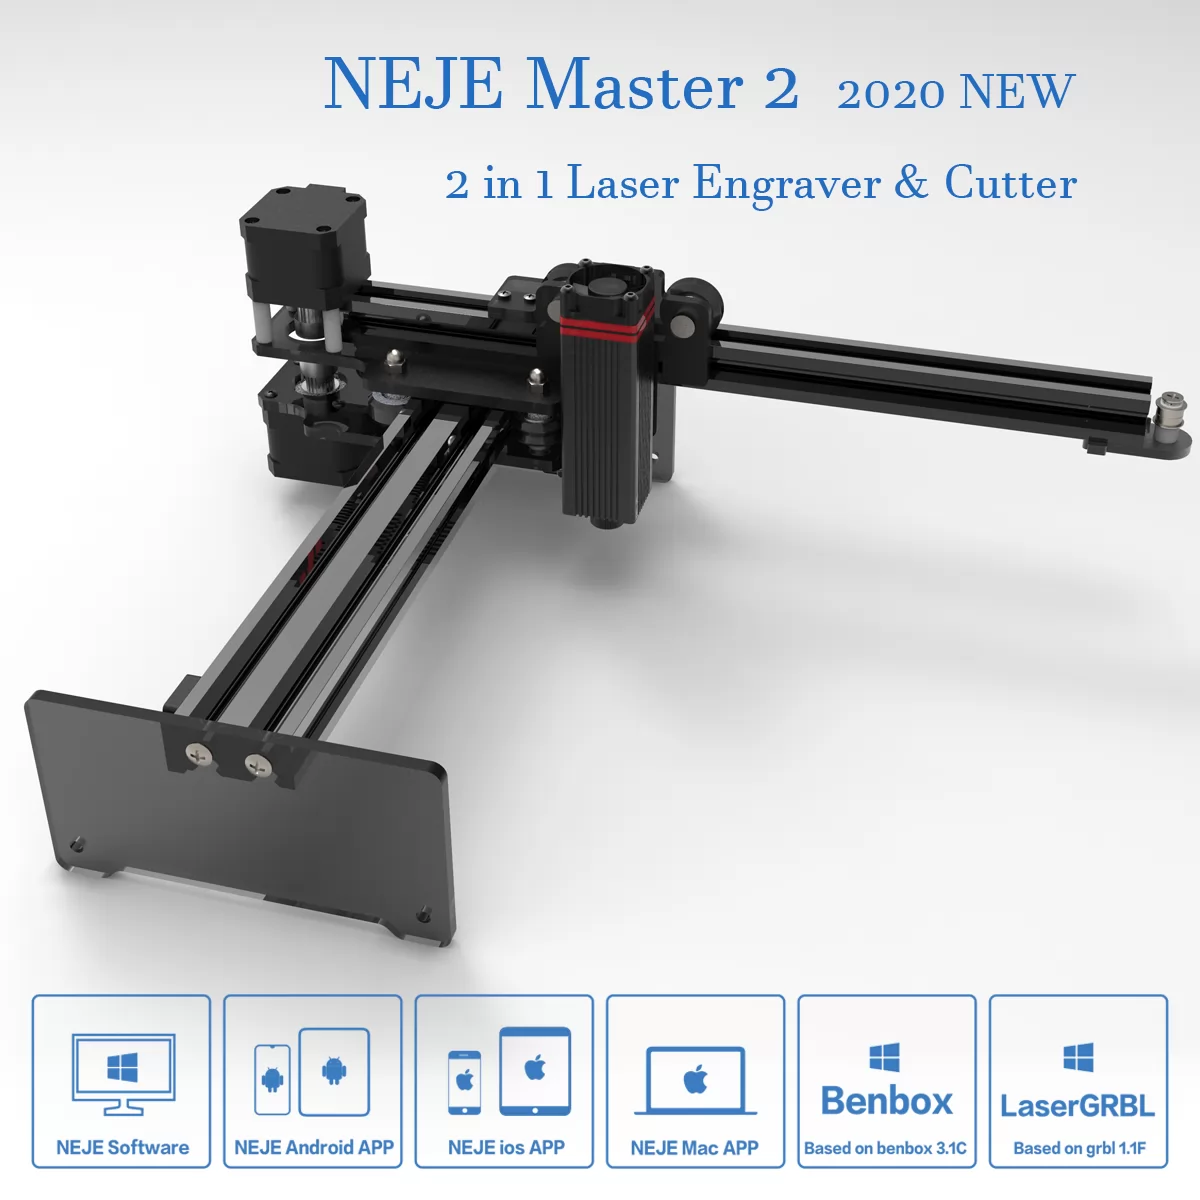 Neje Master 2 - a real review